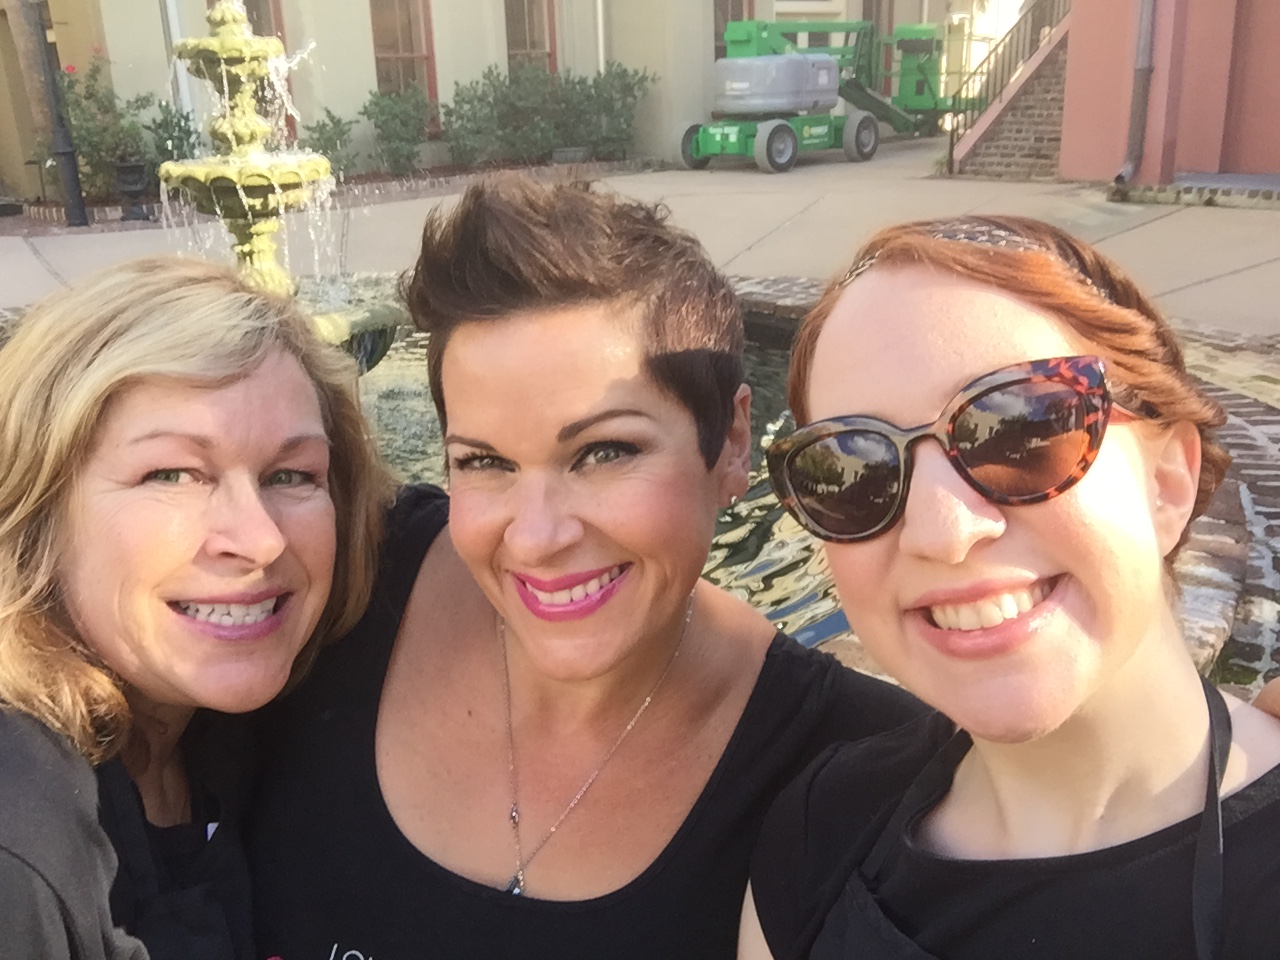 Sandy, Lou, and Alex selfie it up real quick before heading to their wedding!